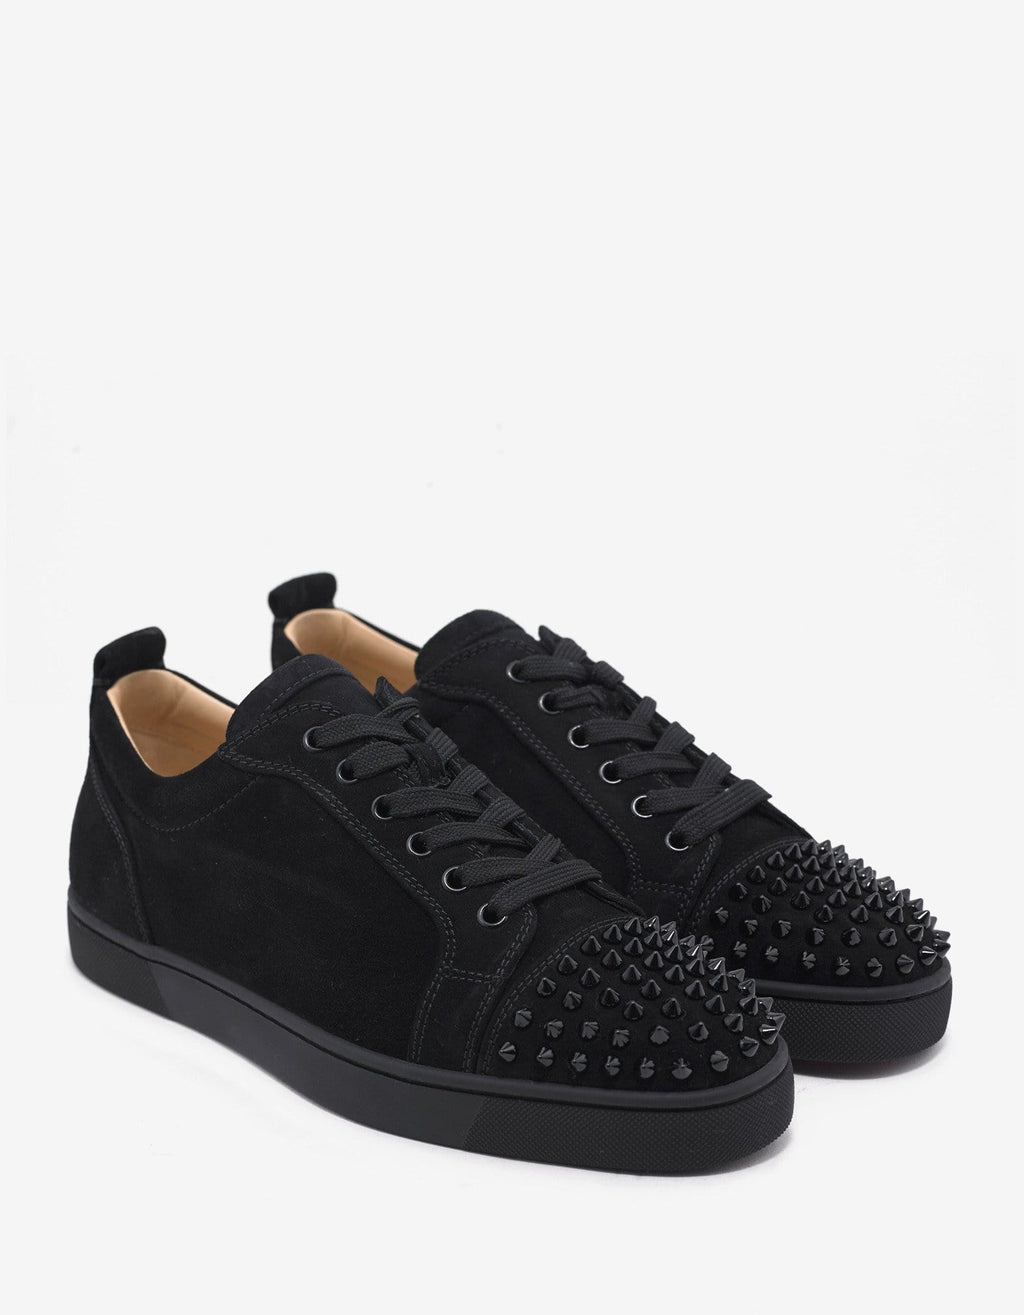 Christian Louboutin Christian Louboutin Louis Junior Spikes Flat Black Suede Trainers